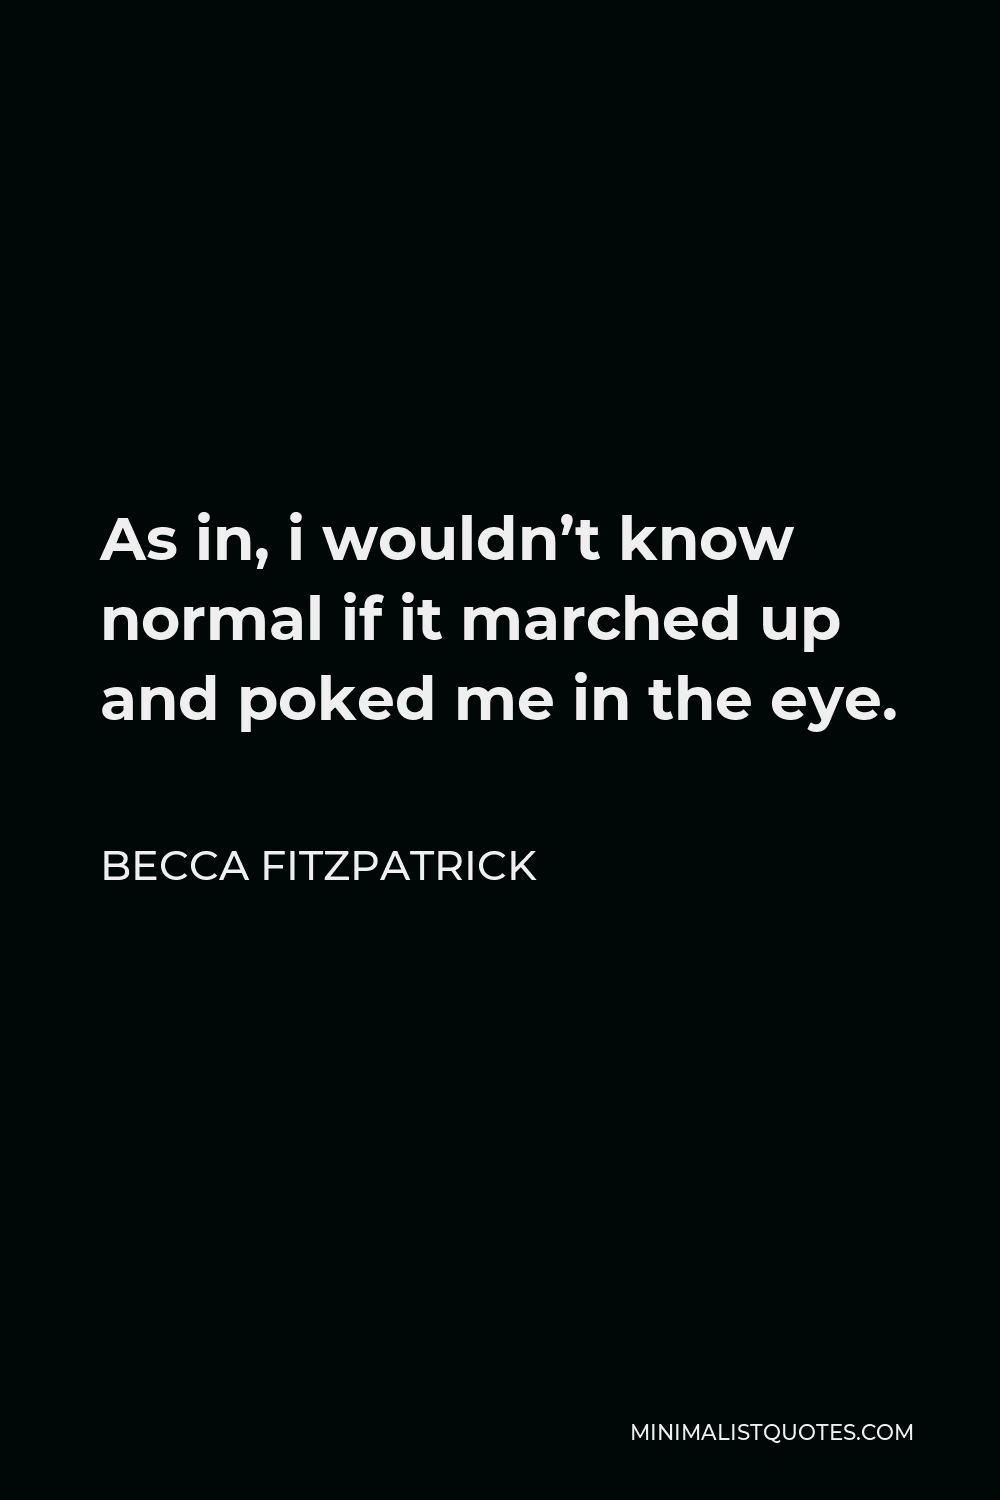 Becca Fitzpatrick Quote - As in, i wouldn’t know normal if it marched up and poked me in the eye.